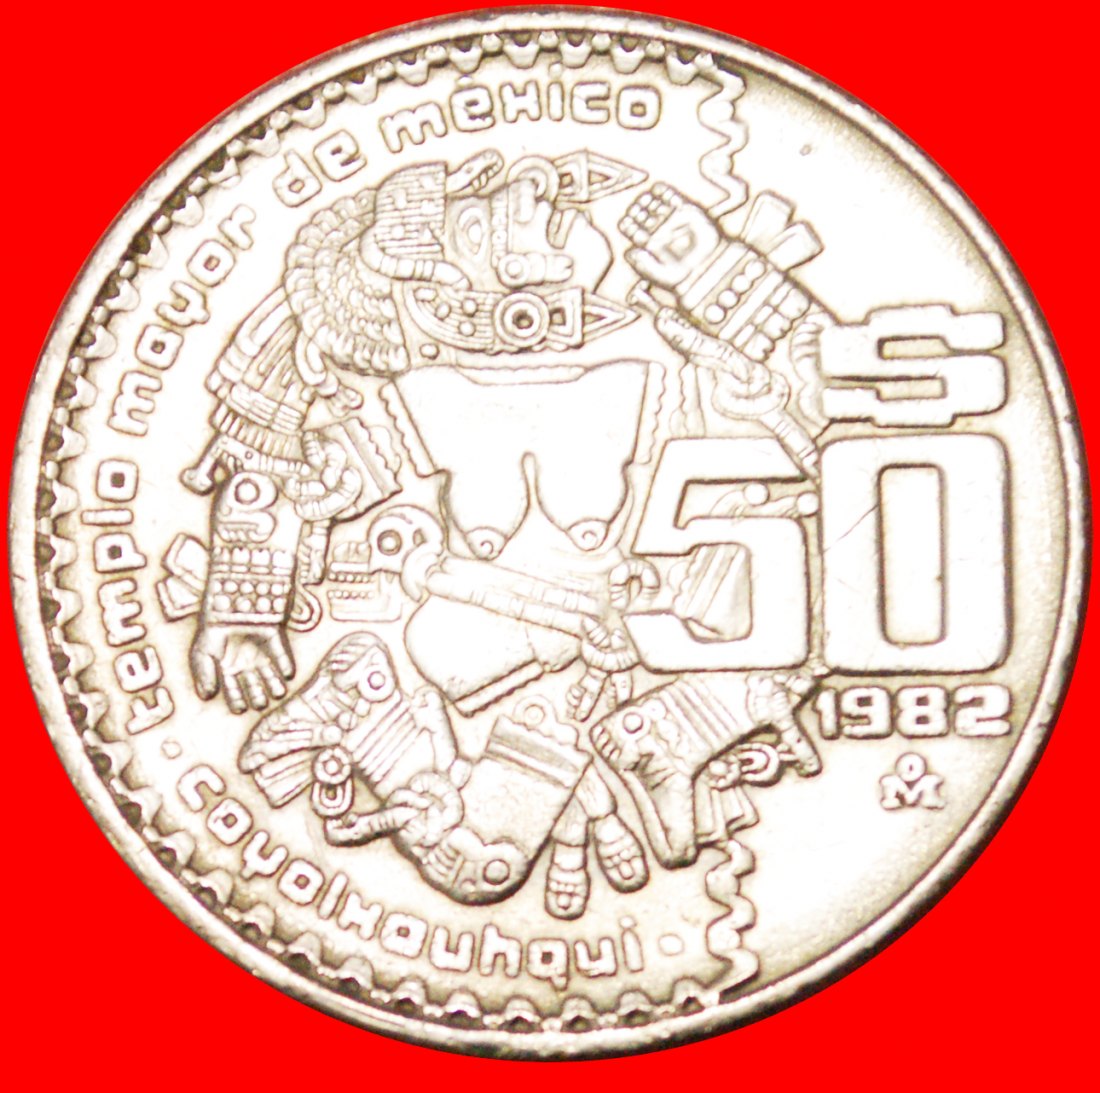  * COYOLXAUHQUI: MEXICO ★ 50 PESO 1982! LOW START ★ NO RESERVE!   